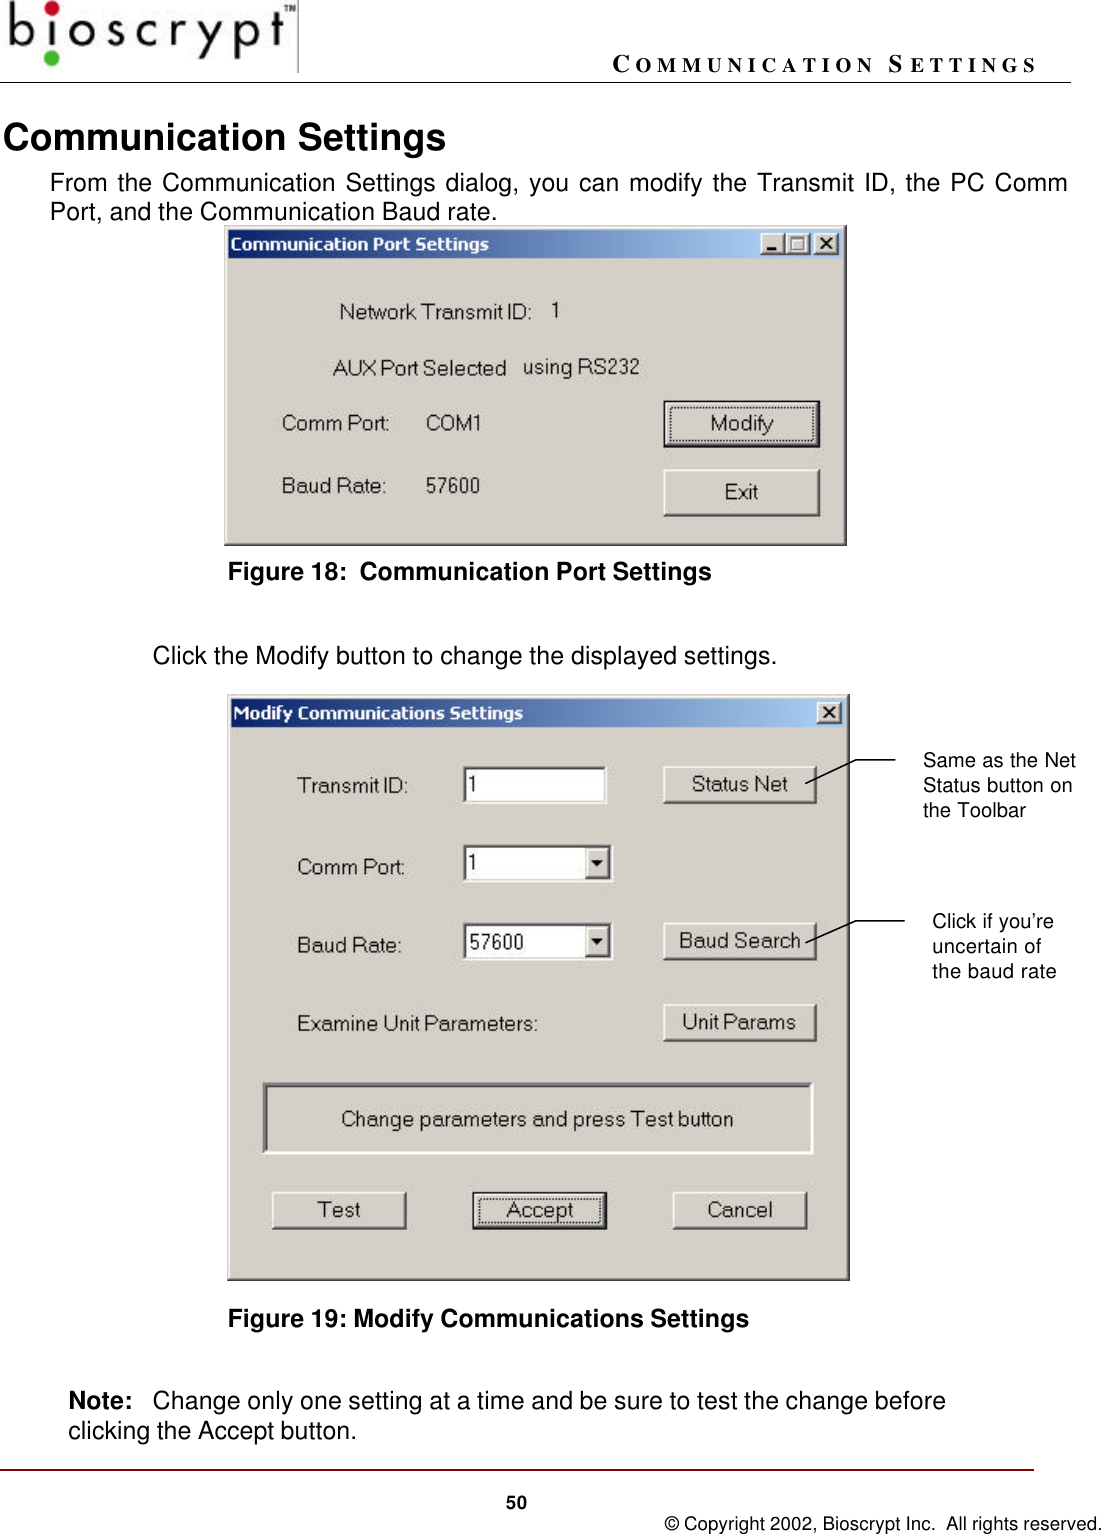 COMMUNICATION SETTINGS50 © Copyright 2002, Bioscrypt Inc.  All rights reserved.Communication SettingsFrom the Communication Settings dialog, you can modify the Transmit ID, the PC CommPort, and the Communication Baud rate.Figure 18:  Communication Port SettingsClick the Modify button to change the displayed settings.Figure 19: Modify Communications SettingsNote: Change only one setting at a time and be sure to test the change beforeclicking the Accept button.Click if you’reuncertain ofthe baud rateSame as the NetStatus button onthe Toolbar